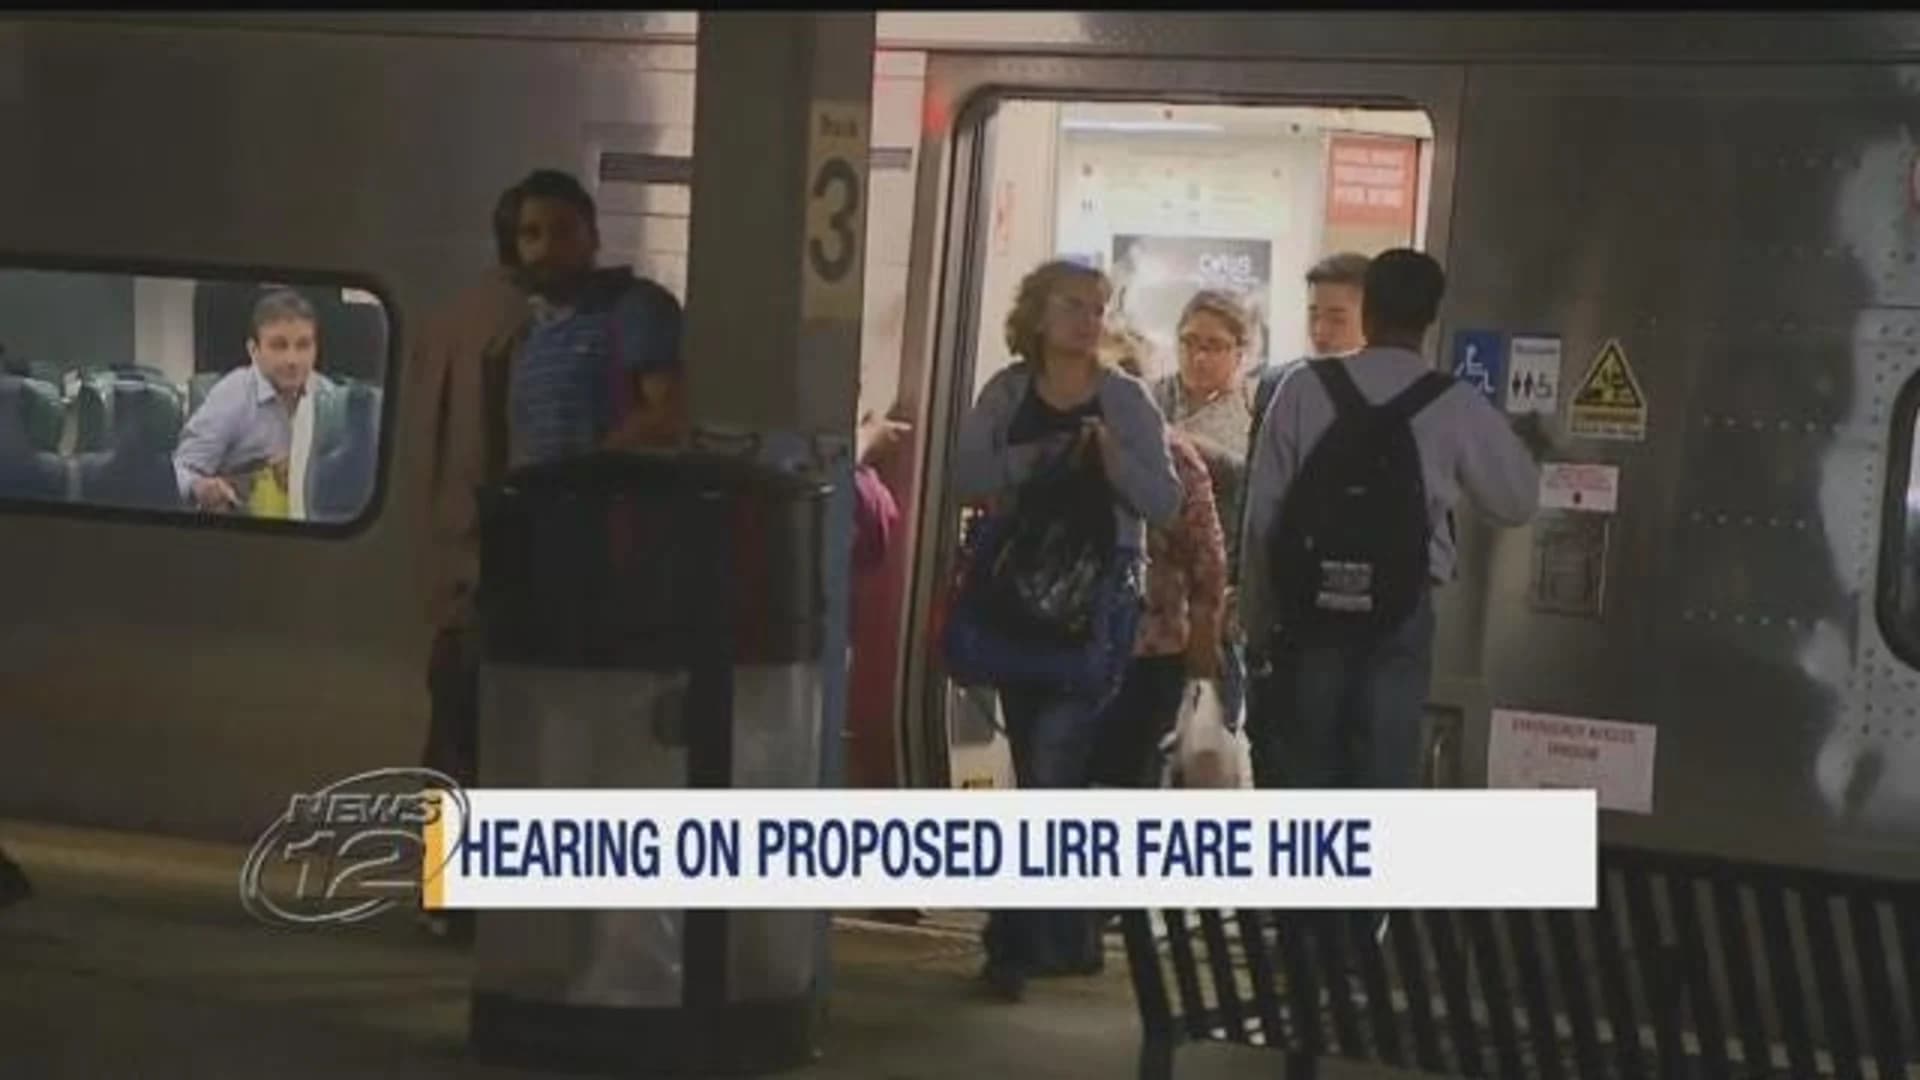 MTA’s proposed 4% fare hike the focal point of public hearing